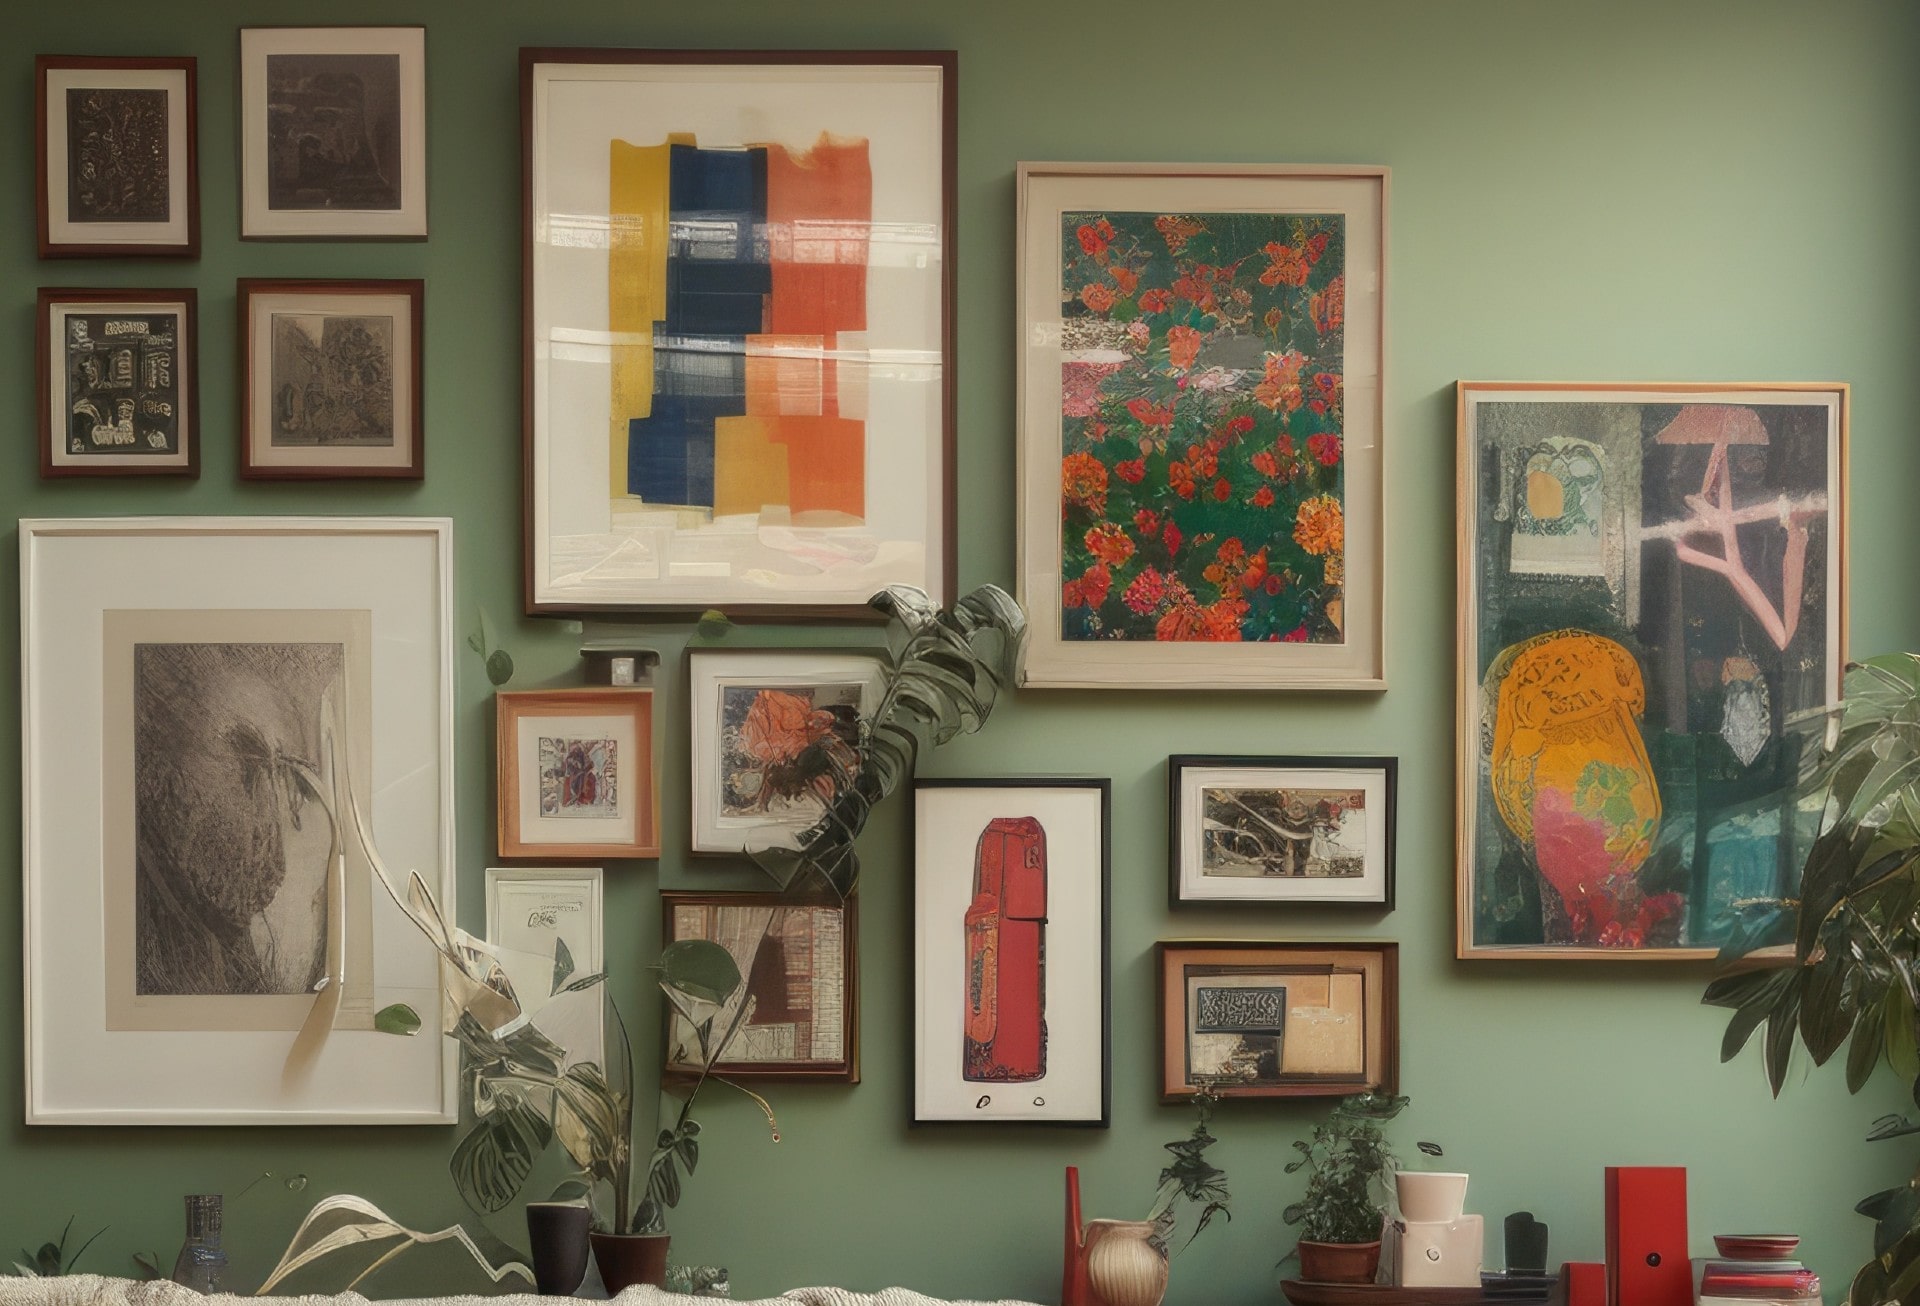 A maximalist wall of art featuring an eclectic collection of images, prints and different coloured frames in various sizes